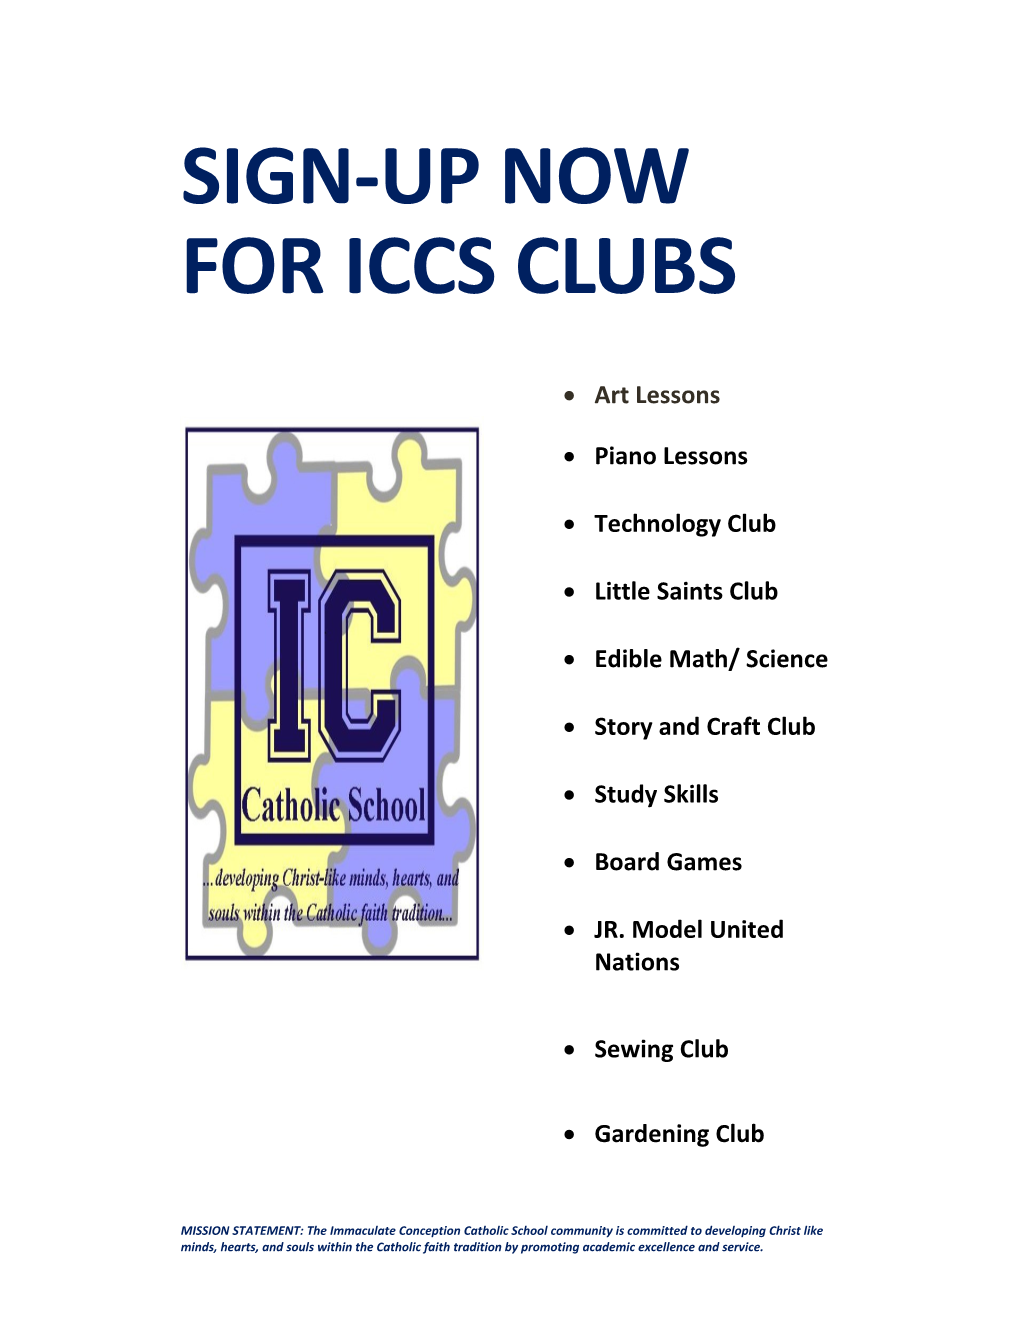 Sign-Up Now for Iccs Clubs